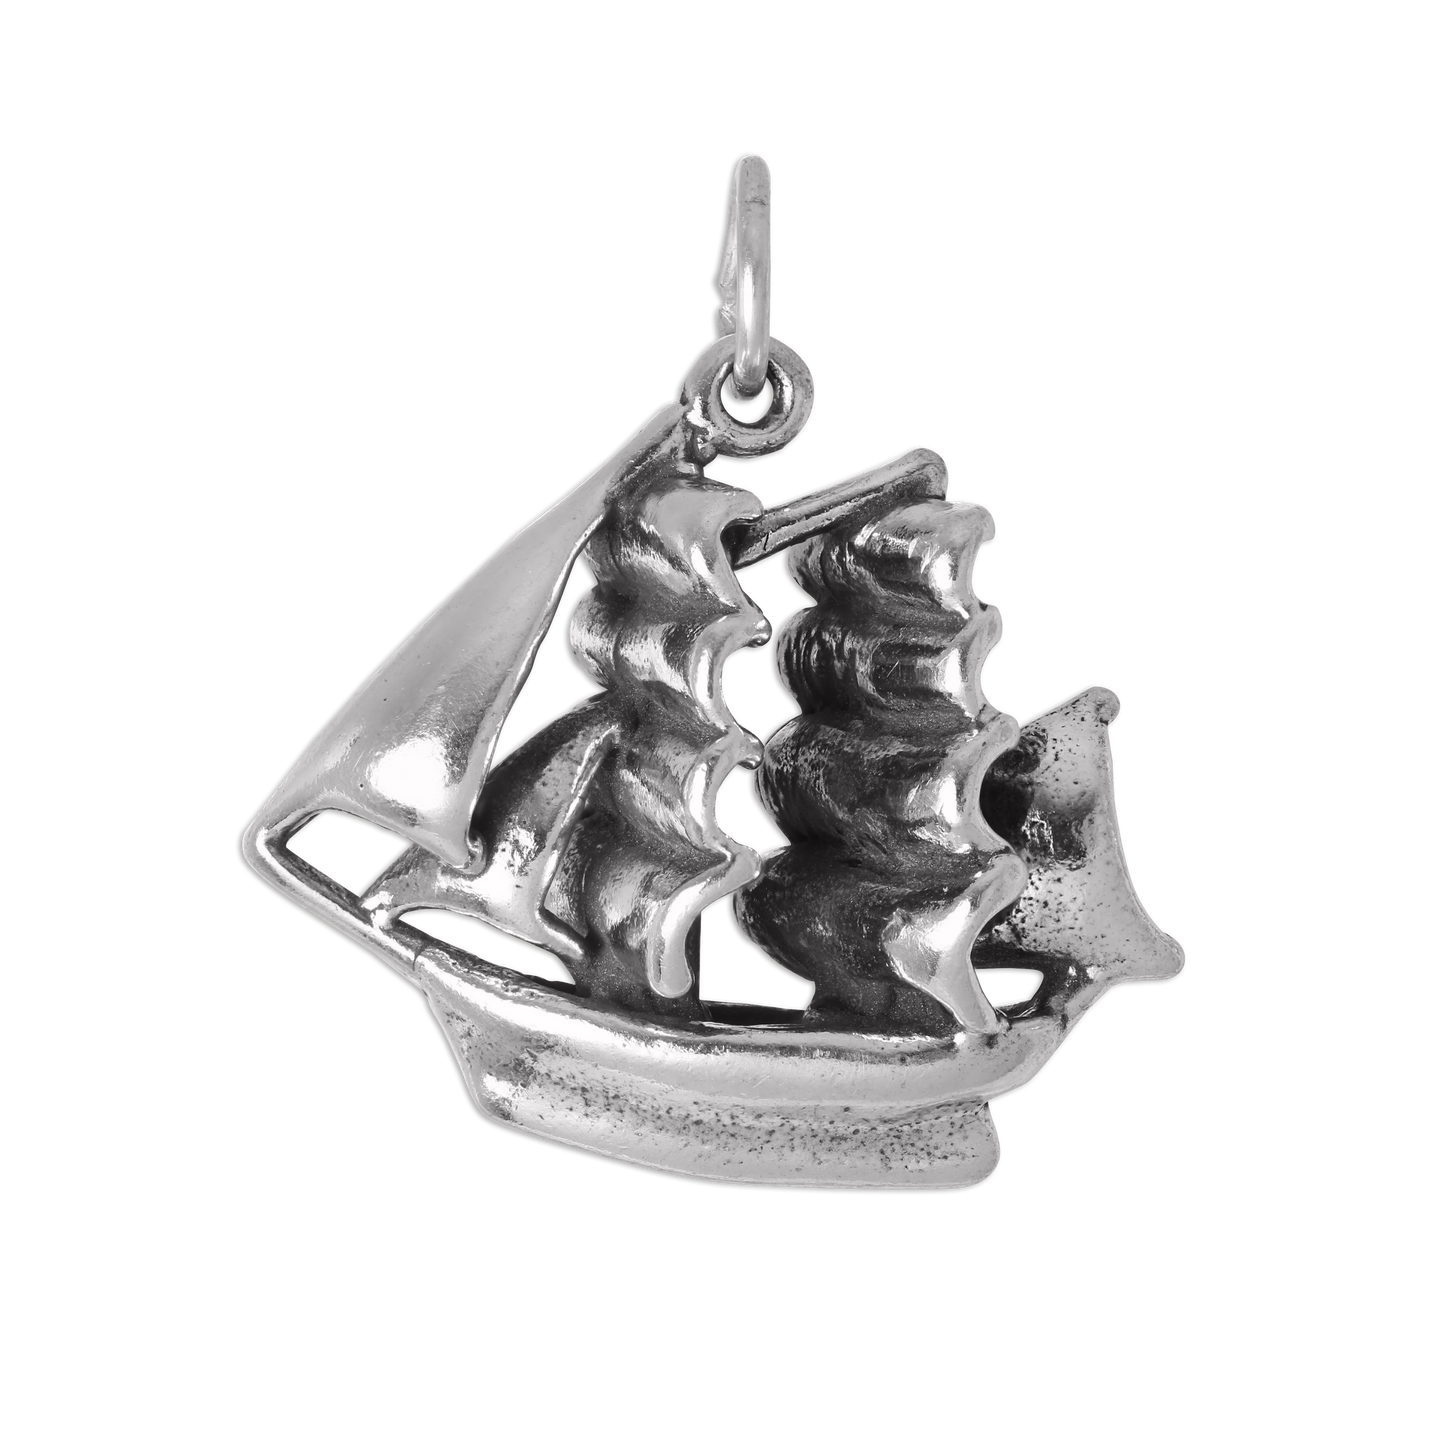 Sterling Silver 3D Pirate Ship Charm